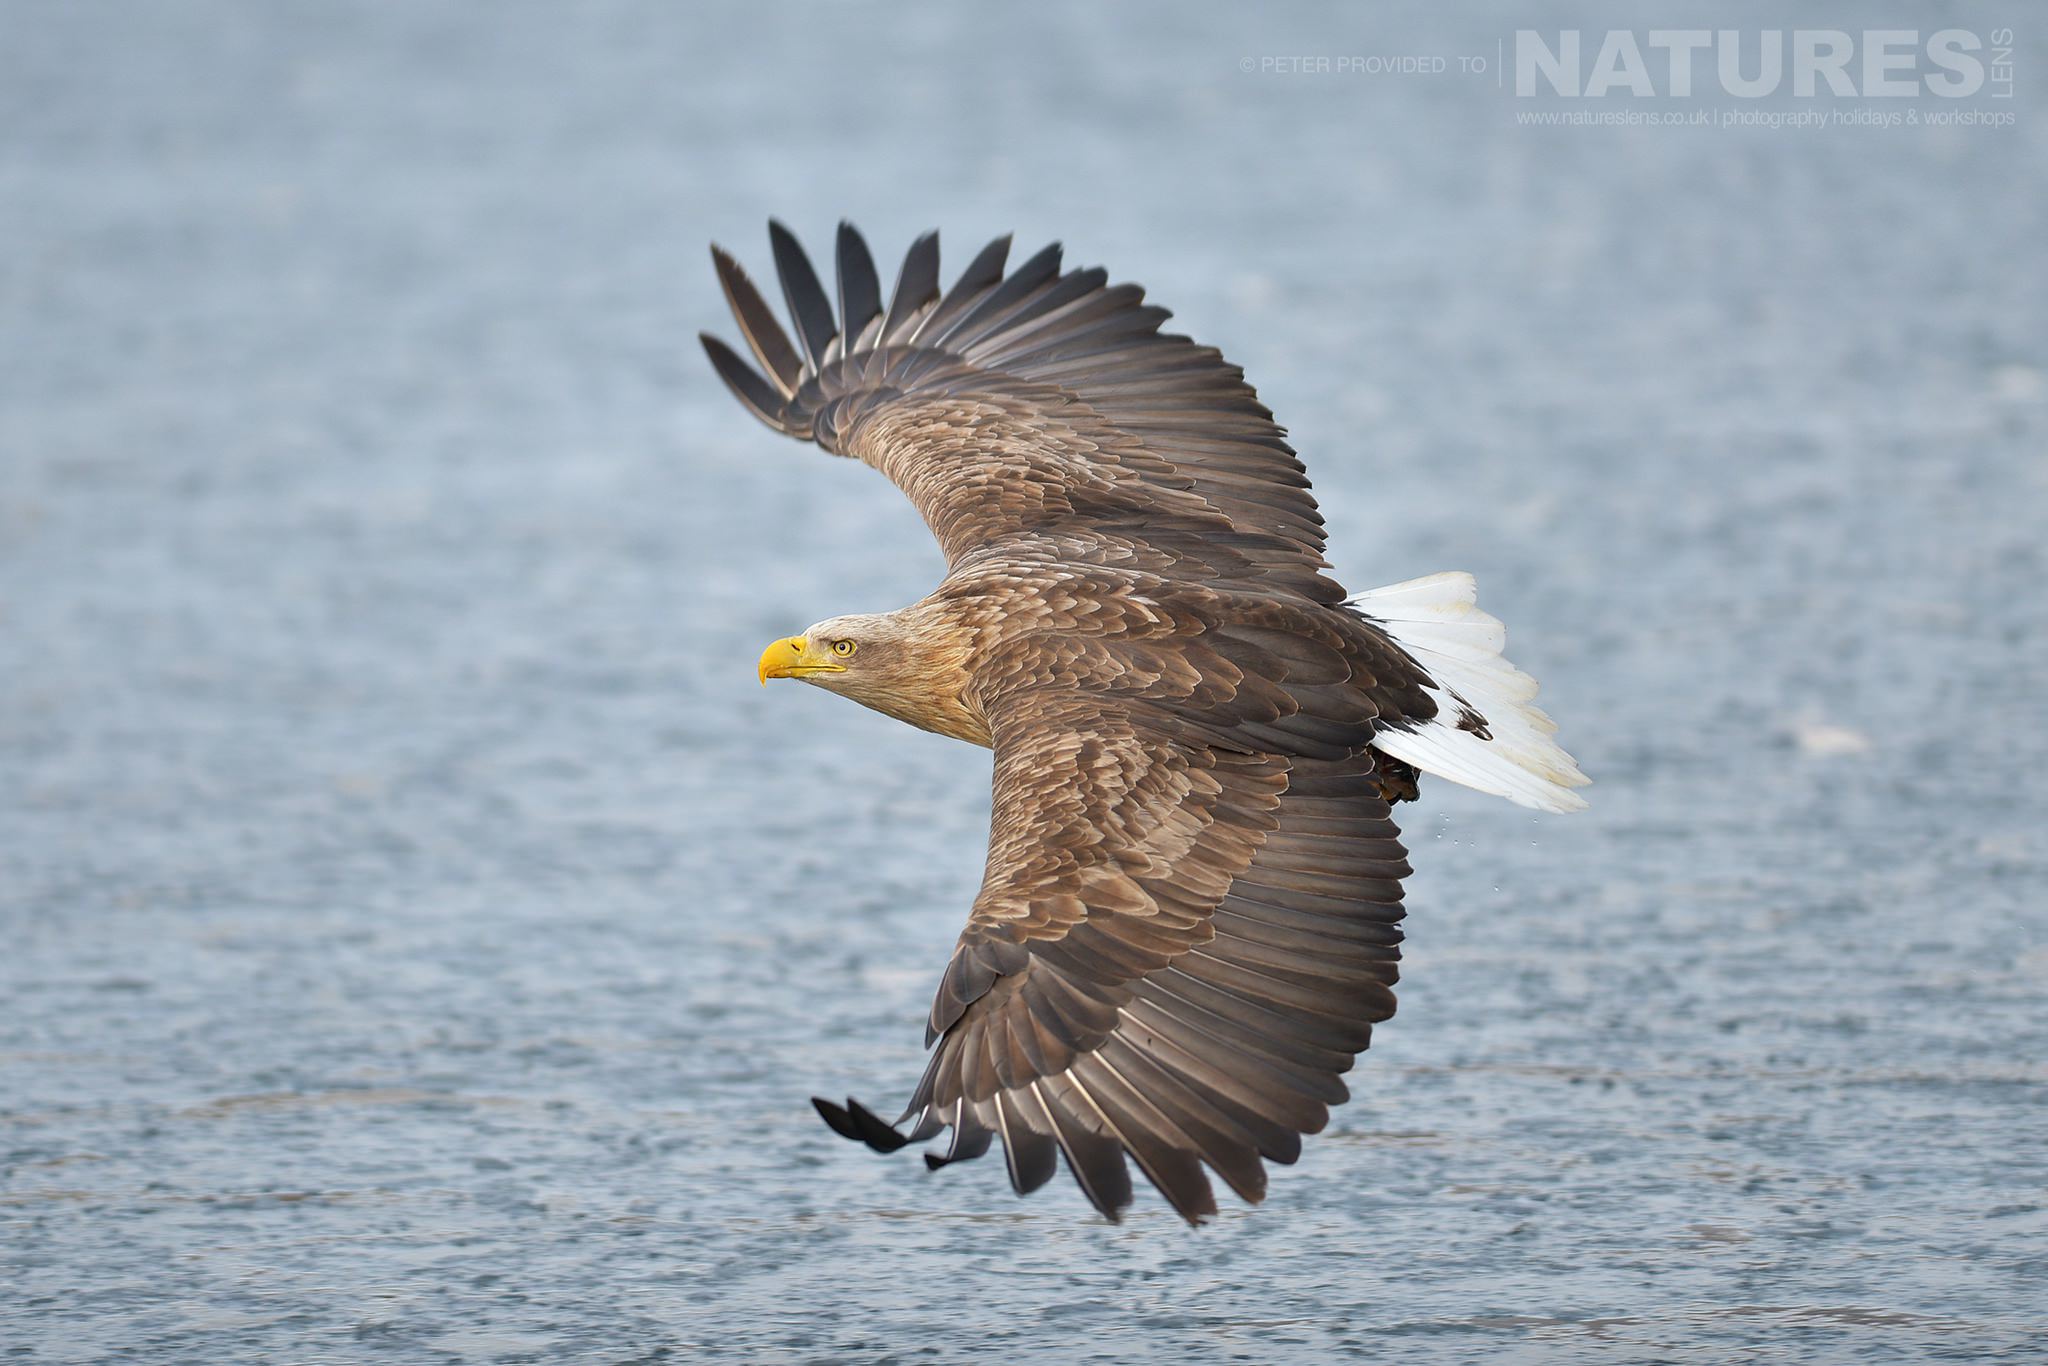 A White Tailed Sea Eagle flies over the frozen seas outside Rausu this image was captured on the Island of Hokkaido during the NaturesLens Winter Wildlife of Japan Photography Holiday